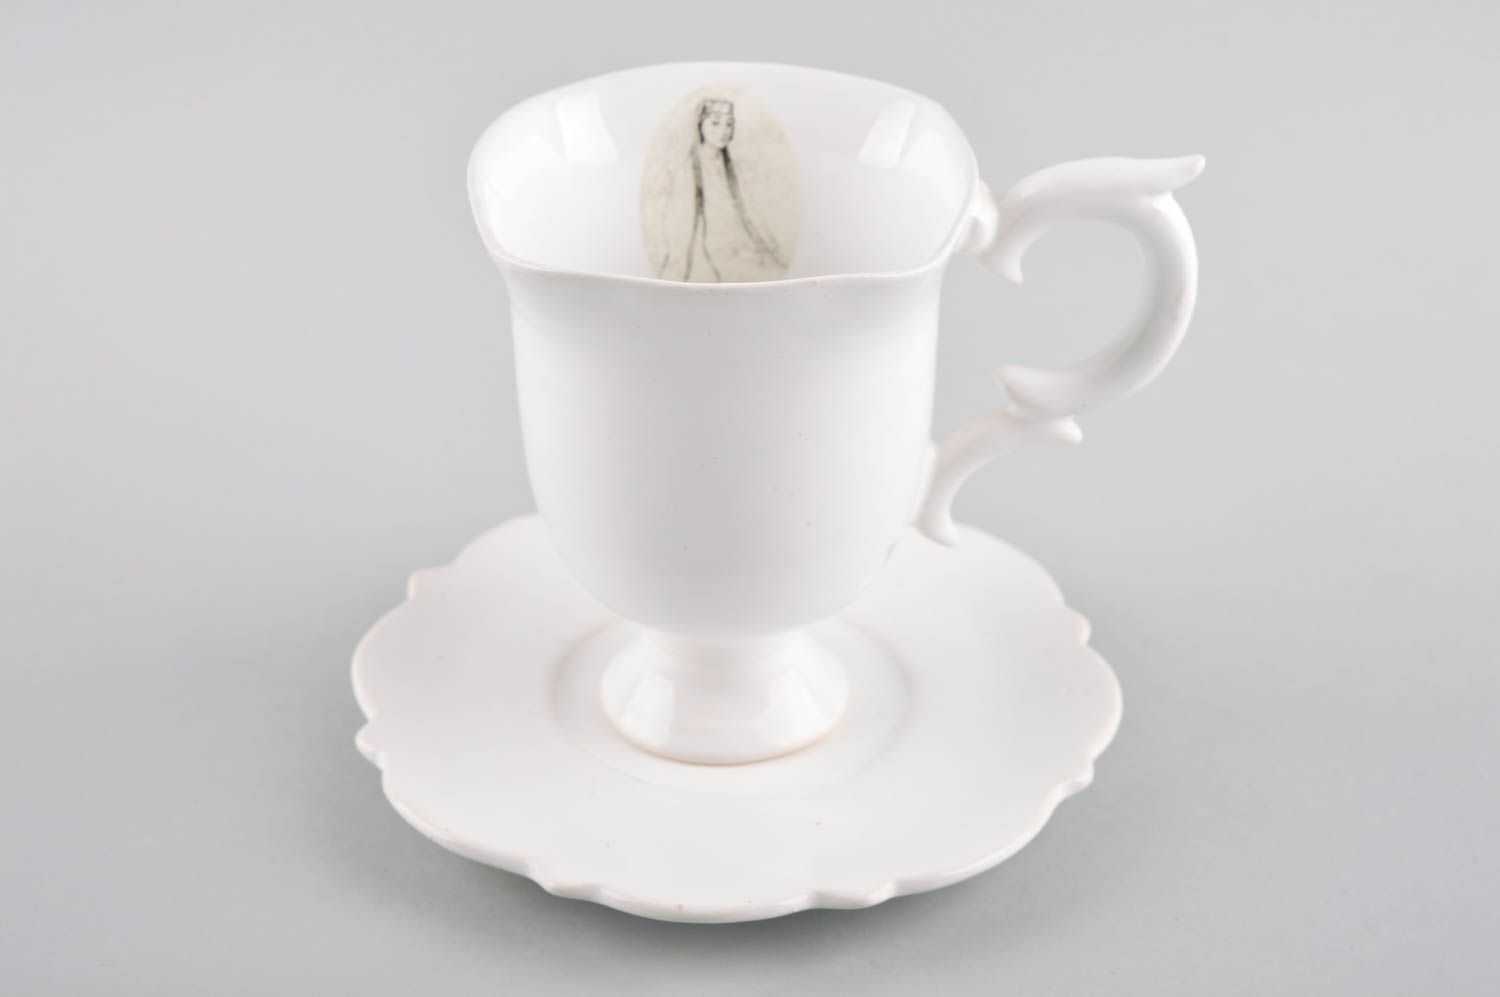 Super elegant white porcelain teacup with handle and saucer photo 1